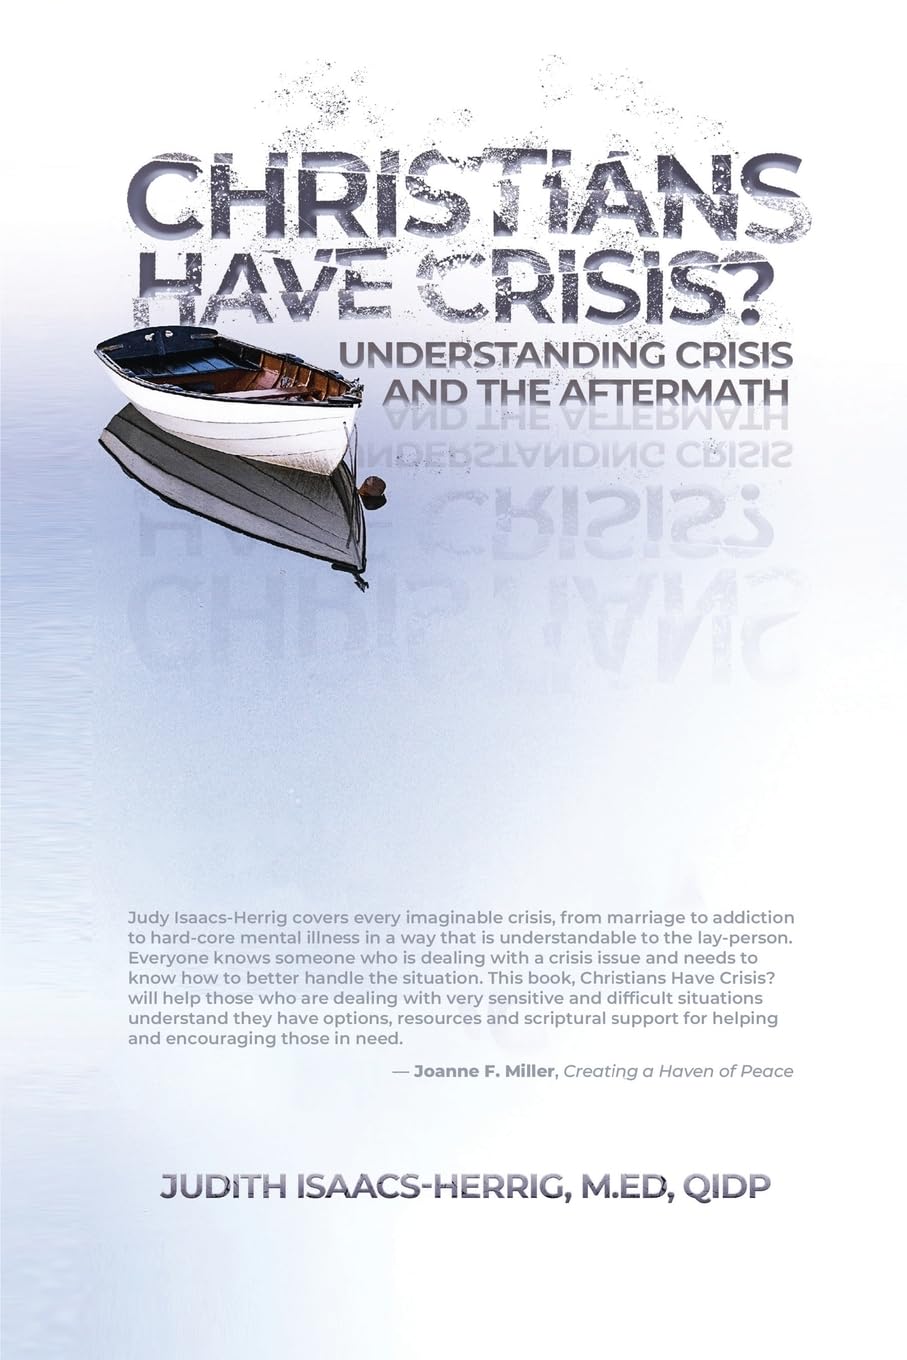 Revolutionary Book Launch: "Christians Have Crisis?: Understanding Crisis and the Aftermath" Offers a New Perspective on Handling Life's Challenges